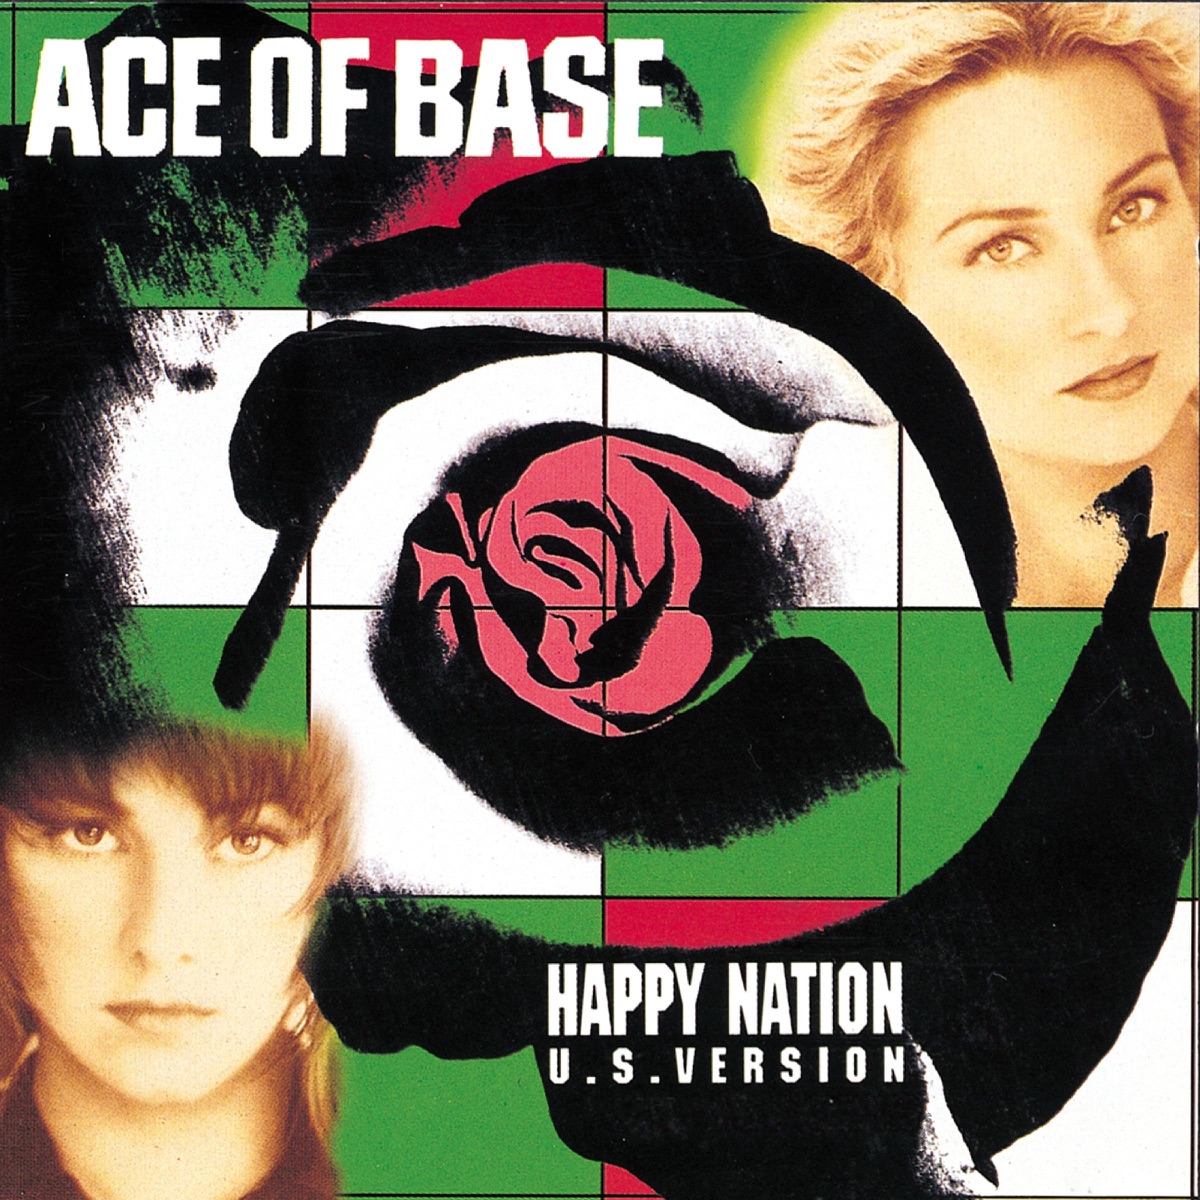 Cruel Summer (Remastered) by Ace of Base on Apple